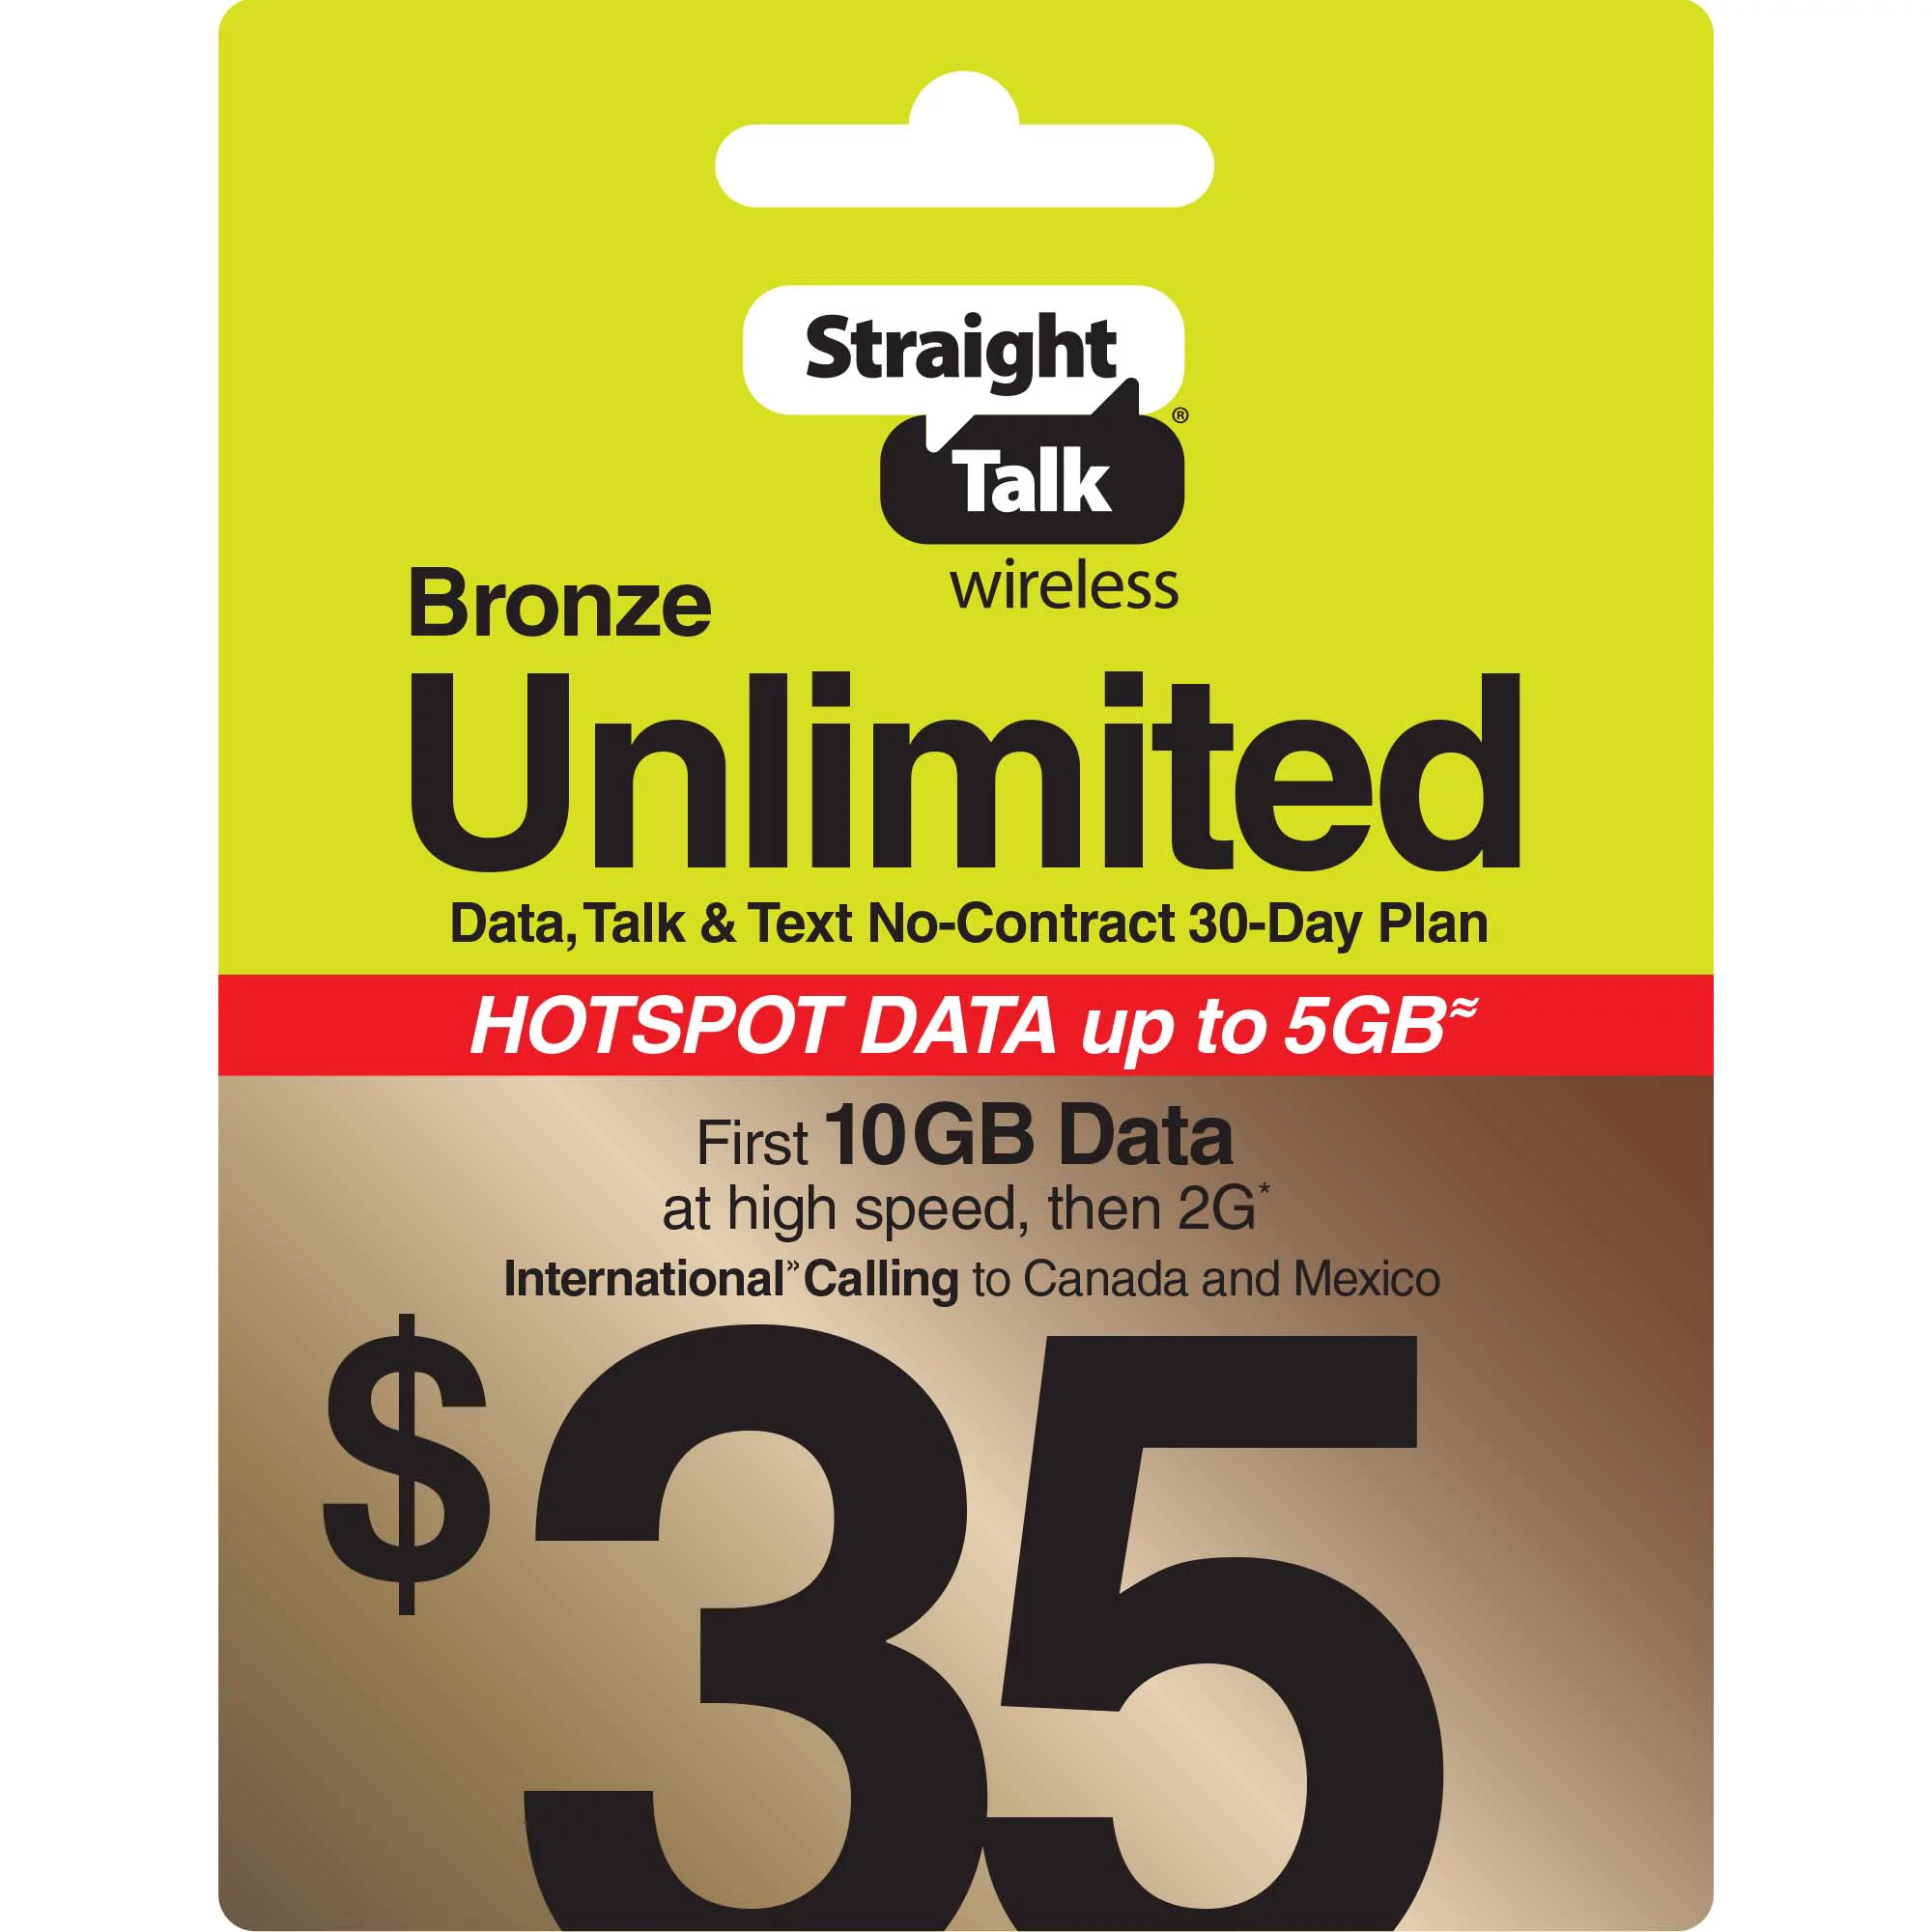 Straight Talk $35 Bronze Unlimited 30-Day Prepaid Plan (10GB of data at high speeds then 2G*) with 5GB Data Hotspot Enabled + Int'l Calling e-PIN Top Up (Email Delivery)